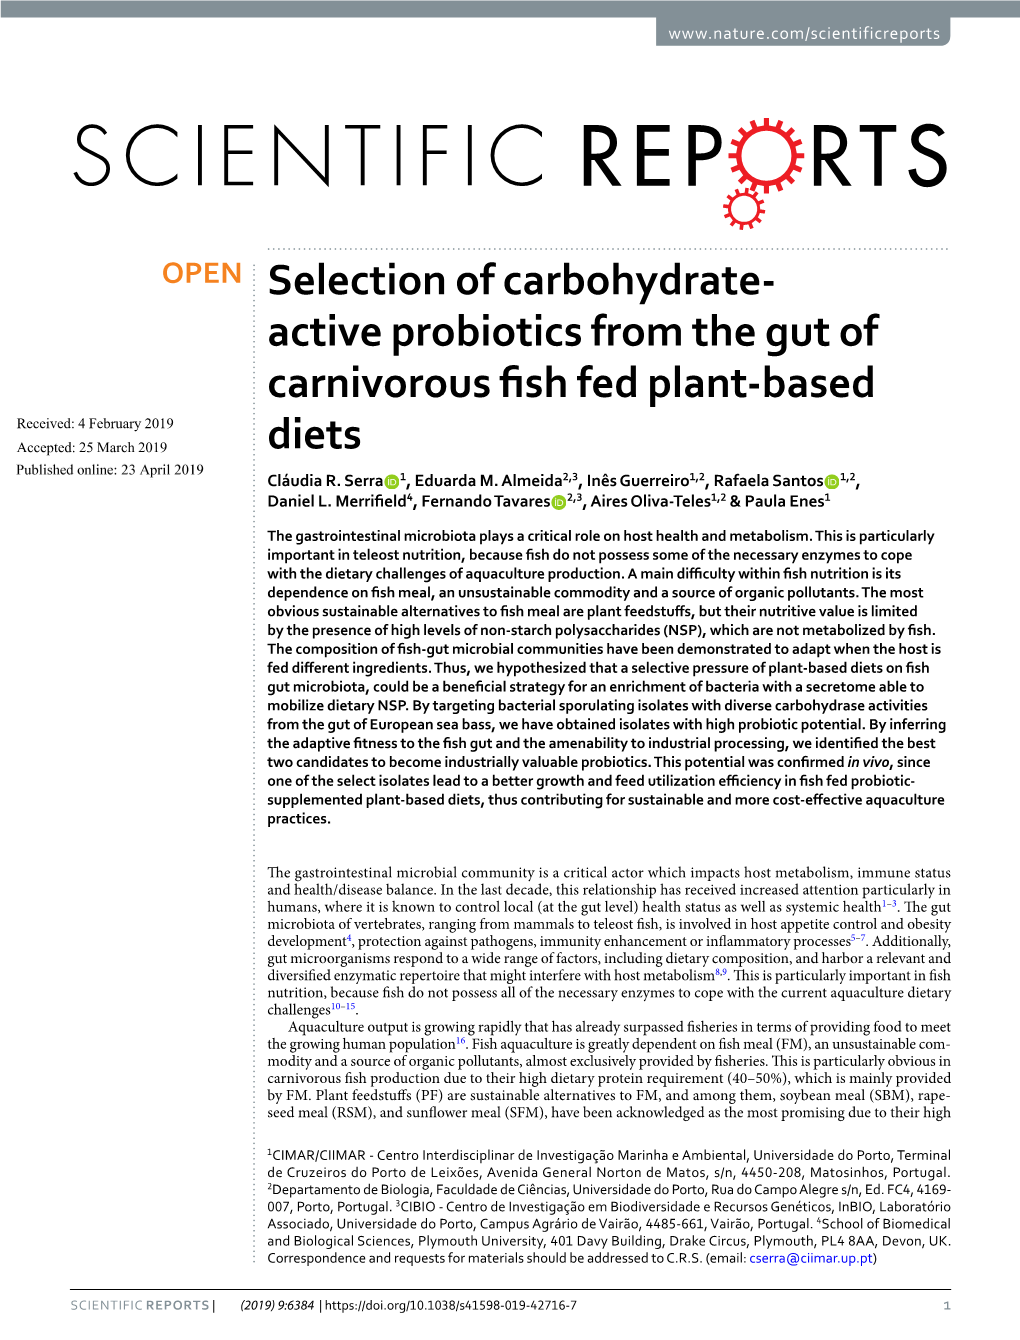 Active Probiotics from the Gut of Carnivorous Fish Fed Plant-Based Diets